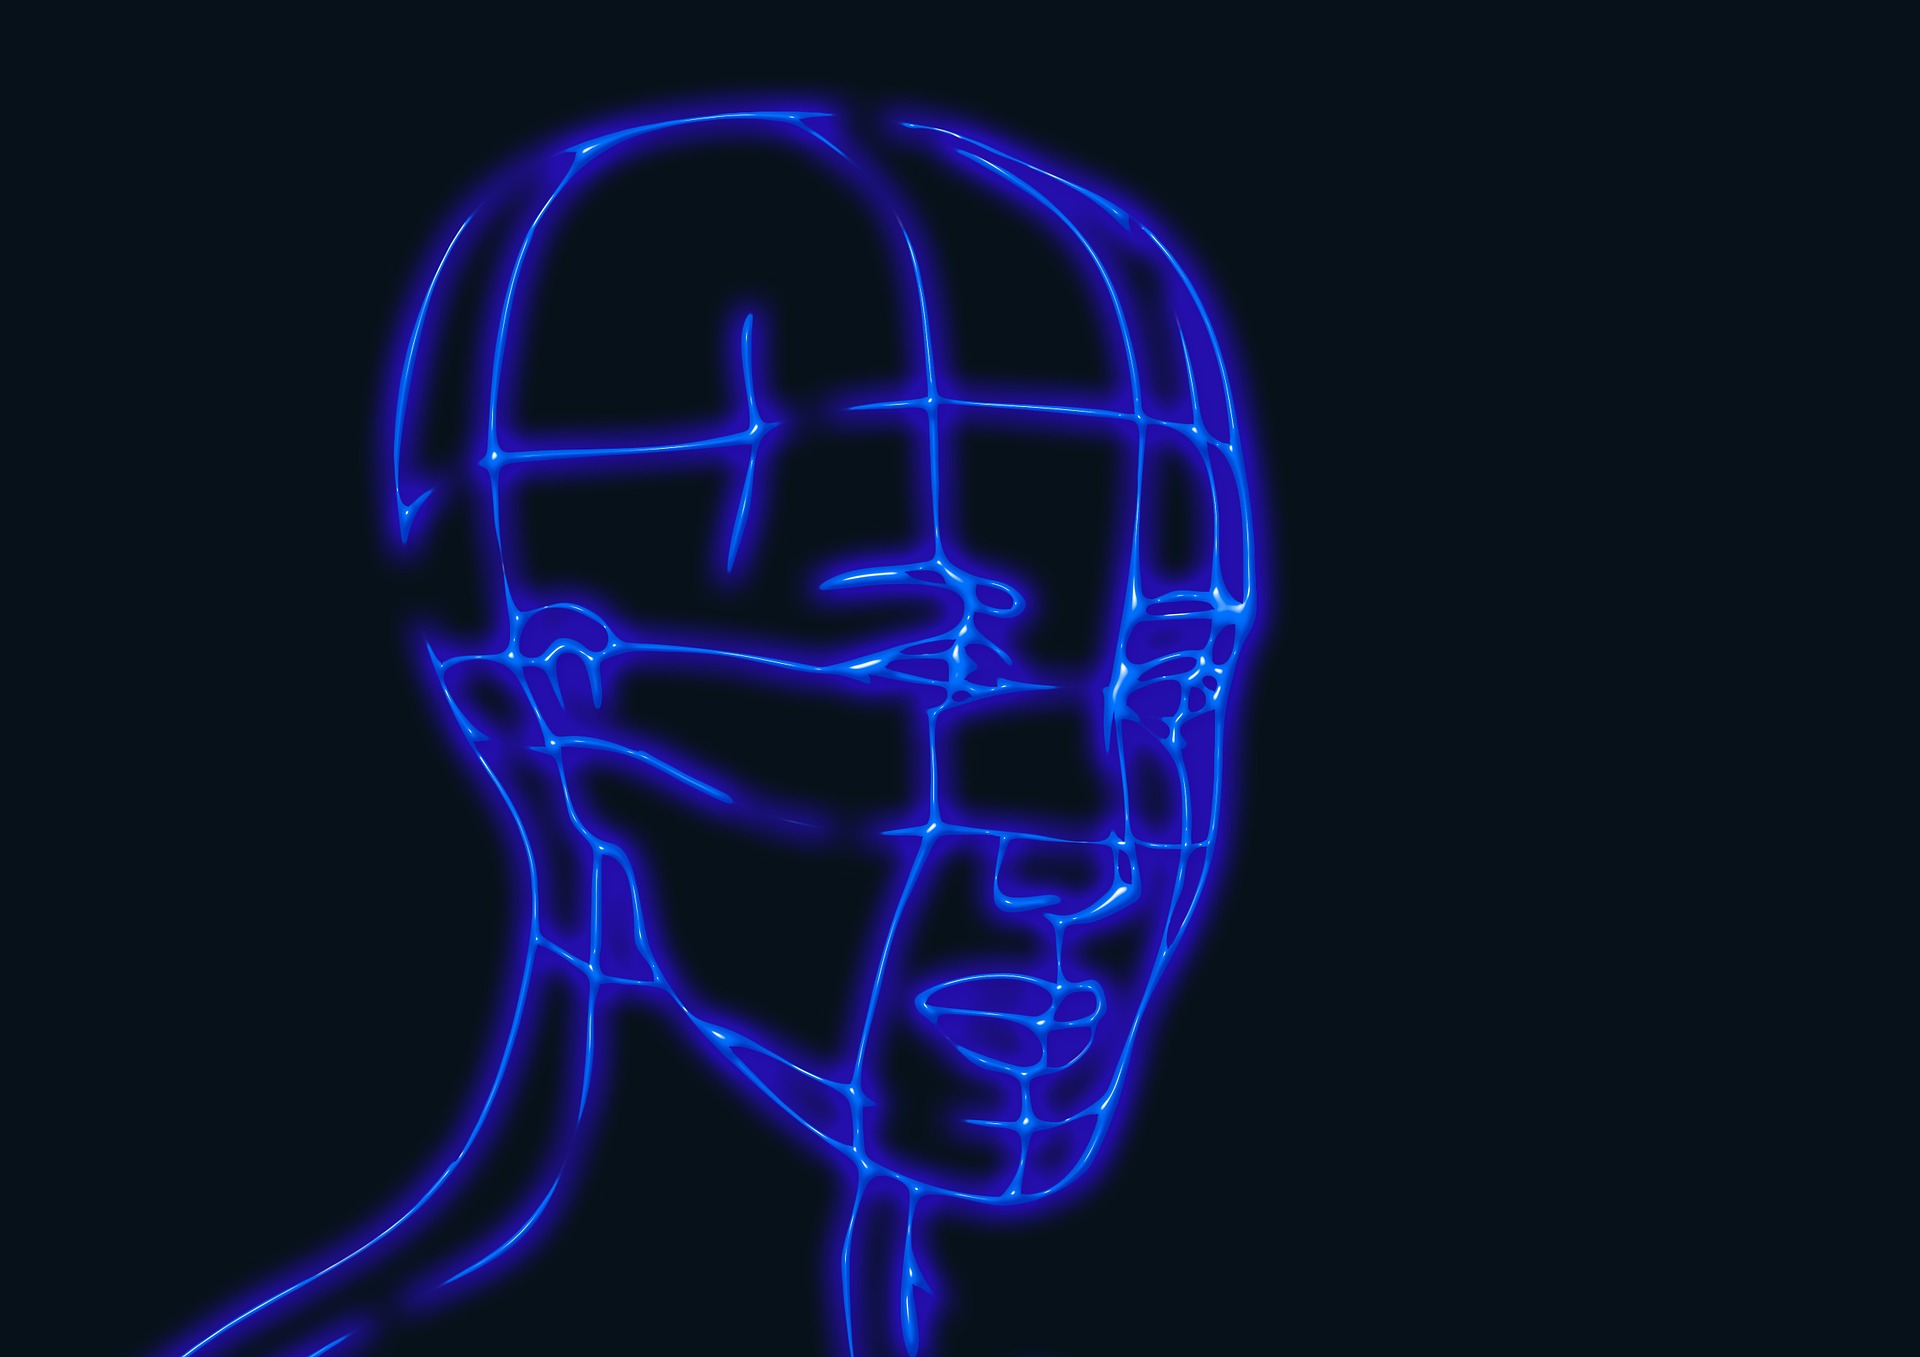 3D computerised graphic of a person's head using blue lines.